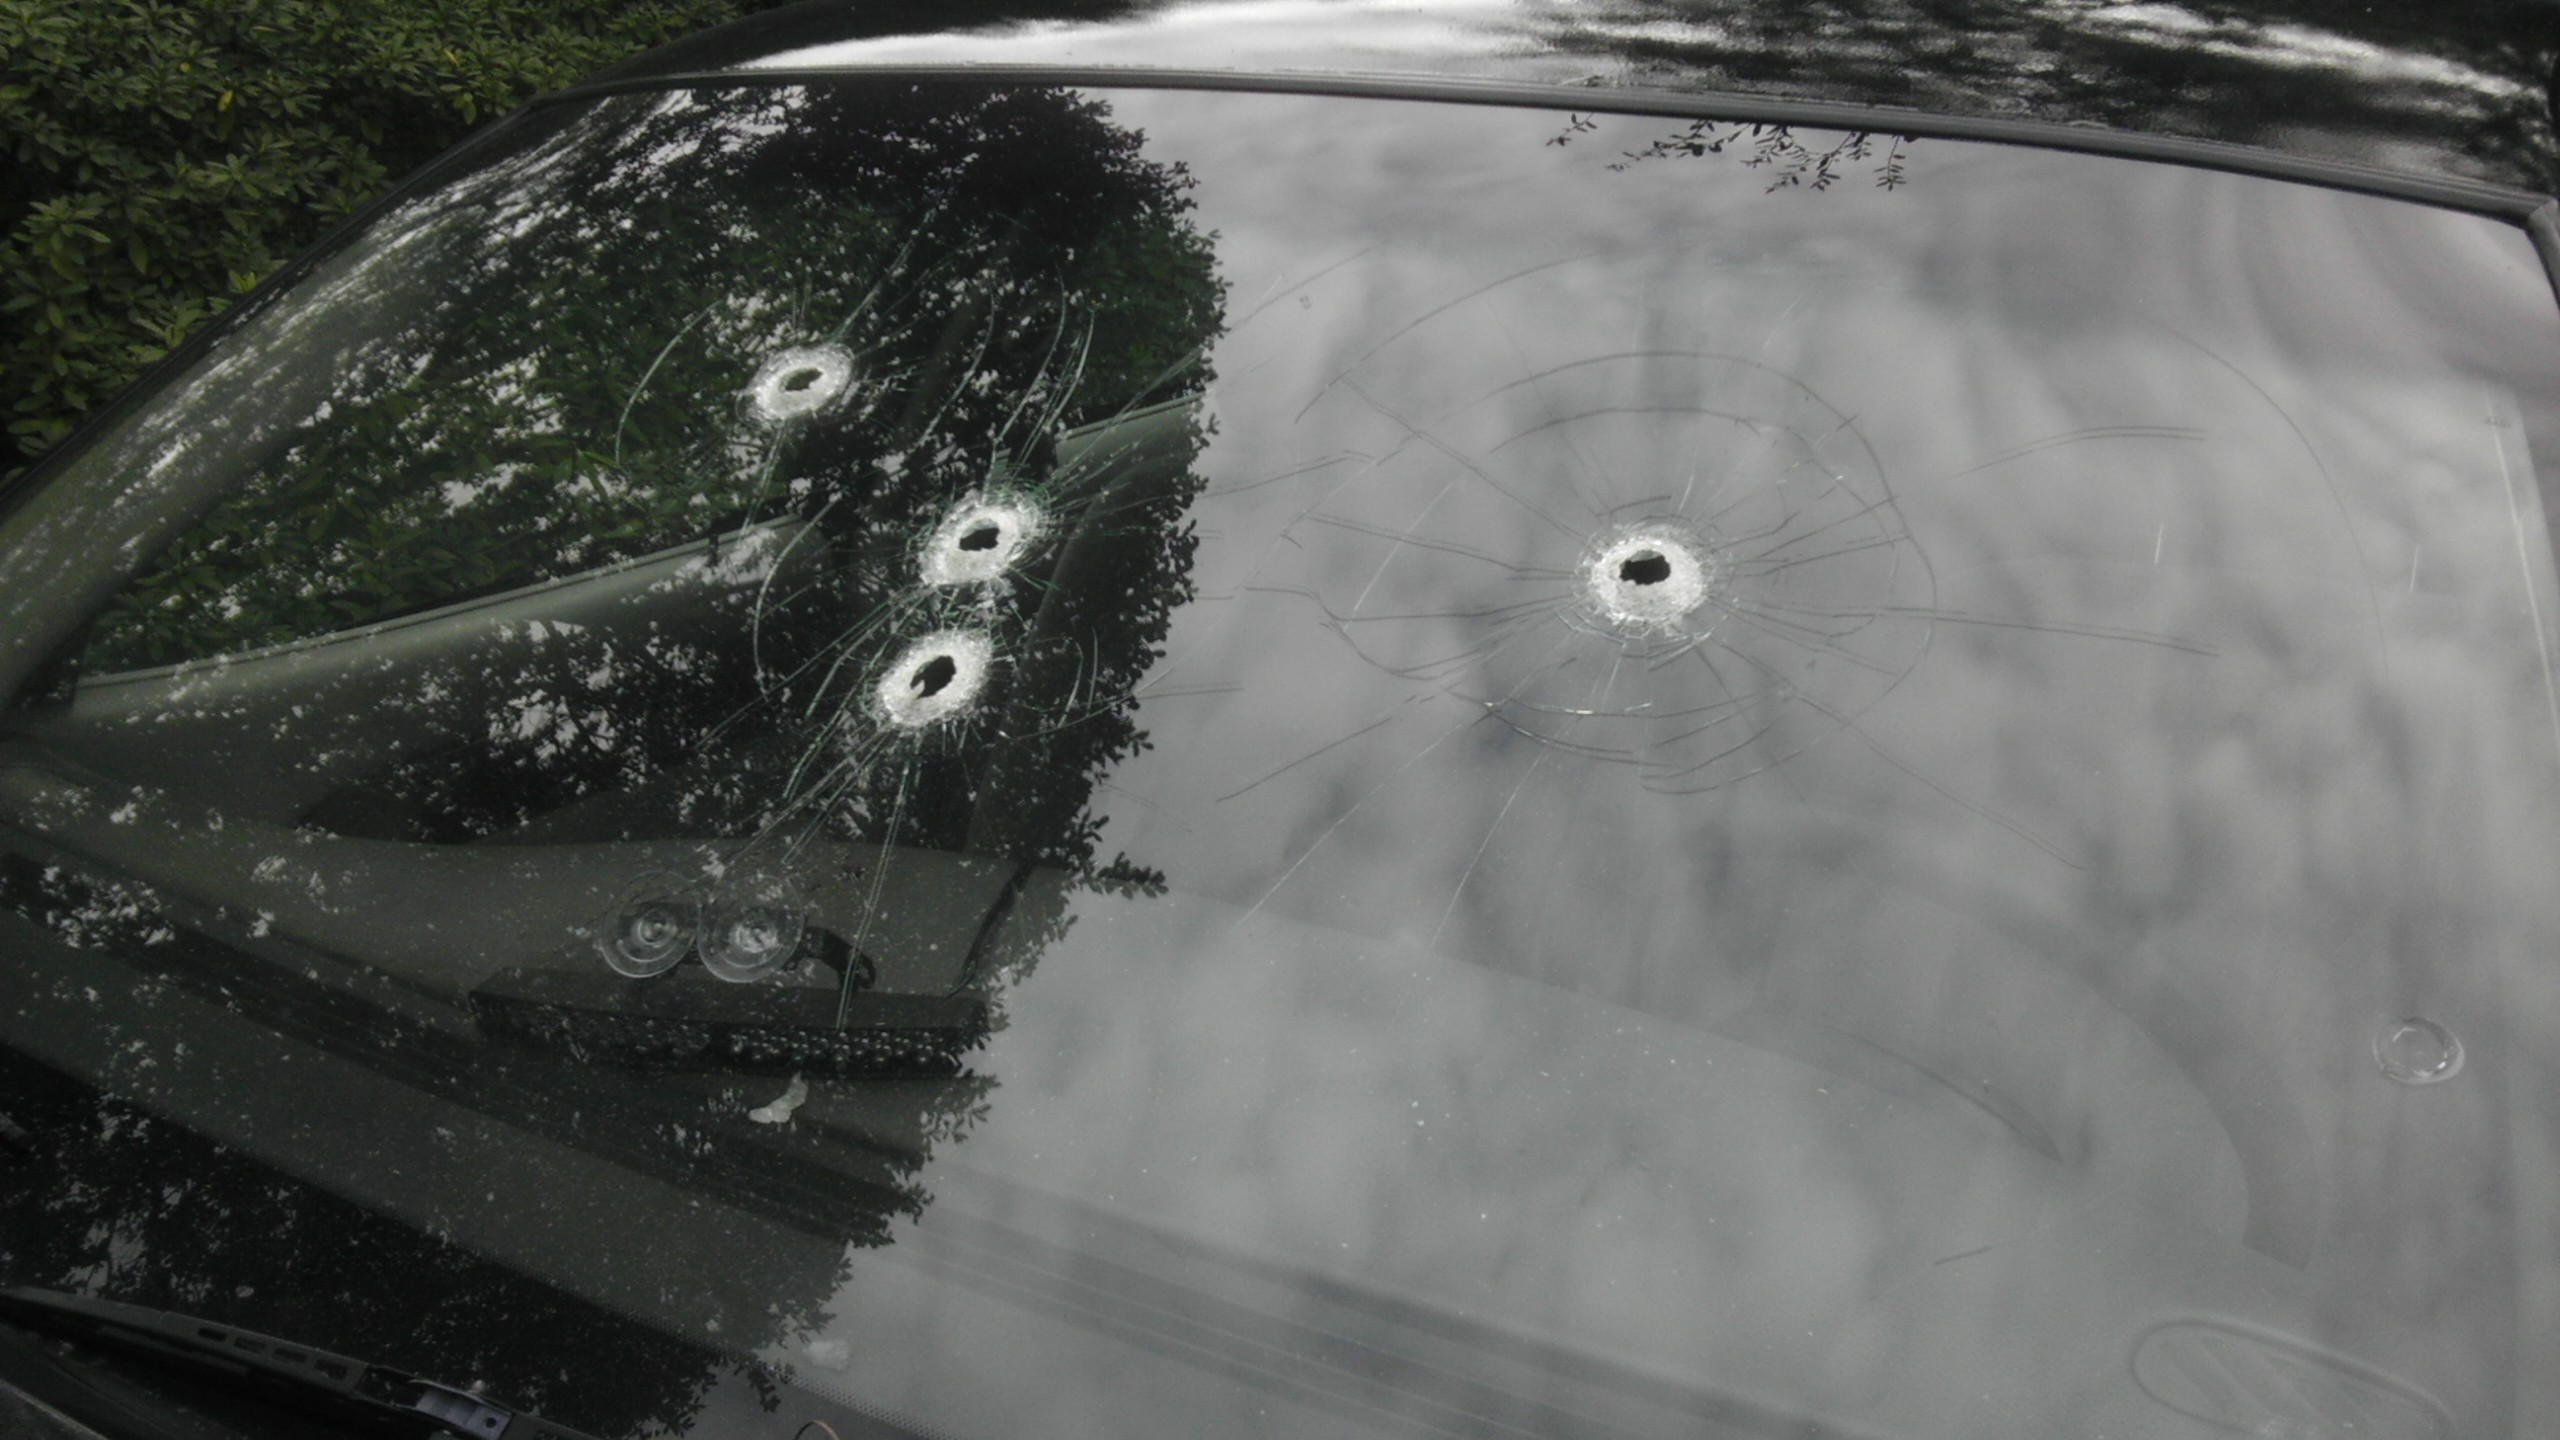 Blowing holes in a windshield with glue sticks using trunnion guns.